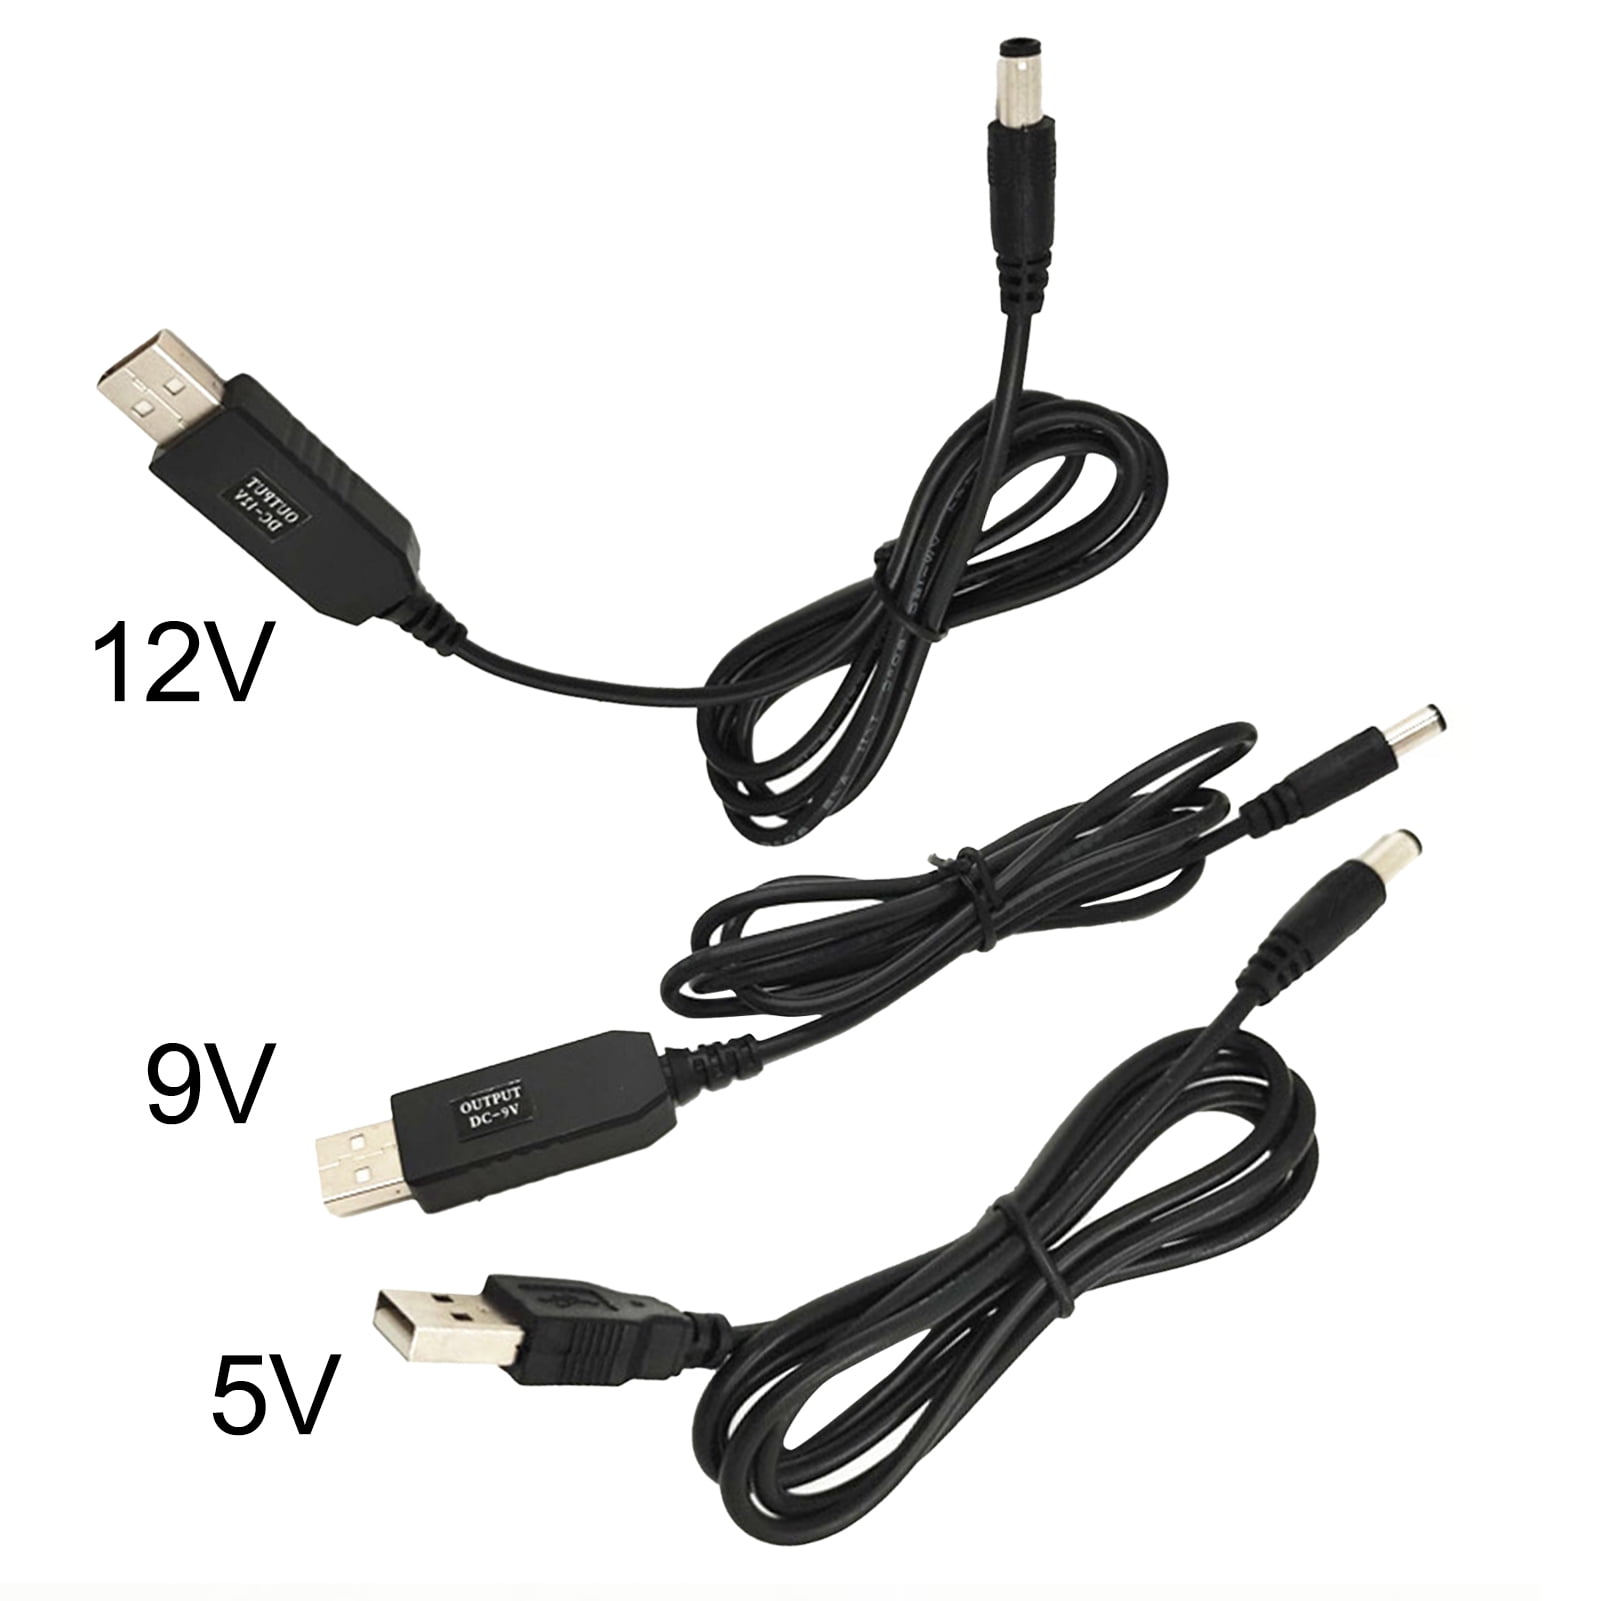 Usb Step-up Converter Cable Dc5v To 9v 12v Boost Power Cable With Dc Jack  5.5x2.1/2.5mm 3.5x1.35mm Voltage Display For Router Fan Led Light